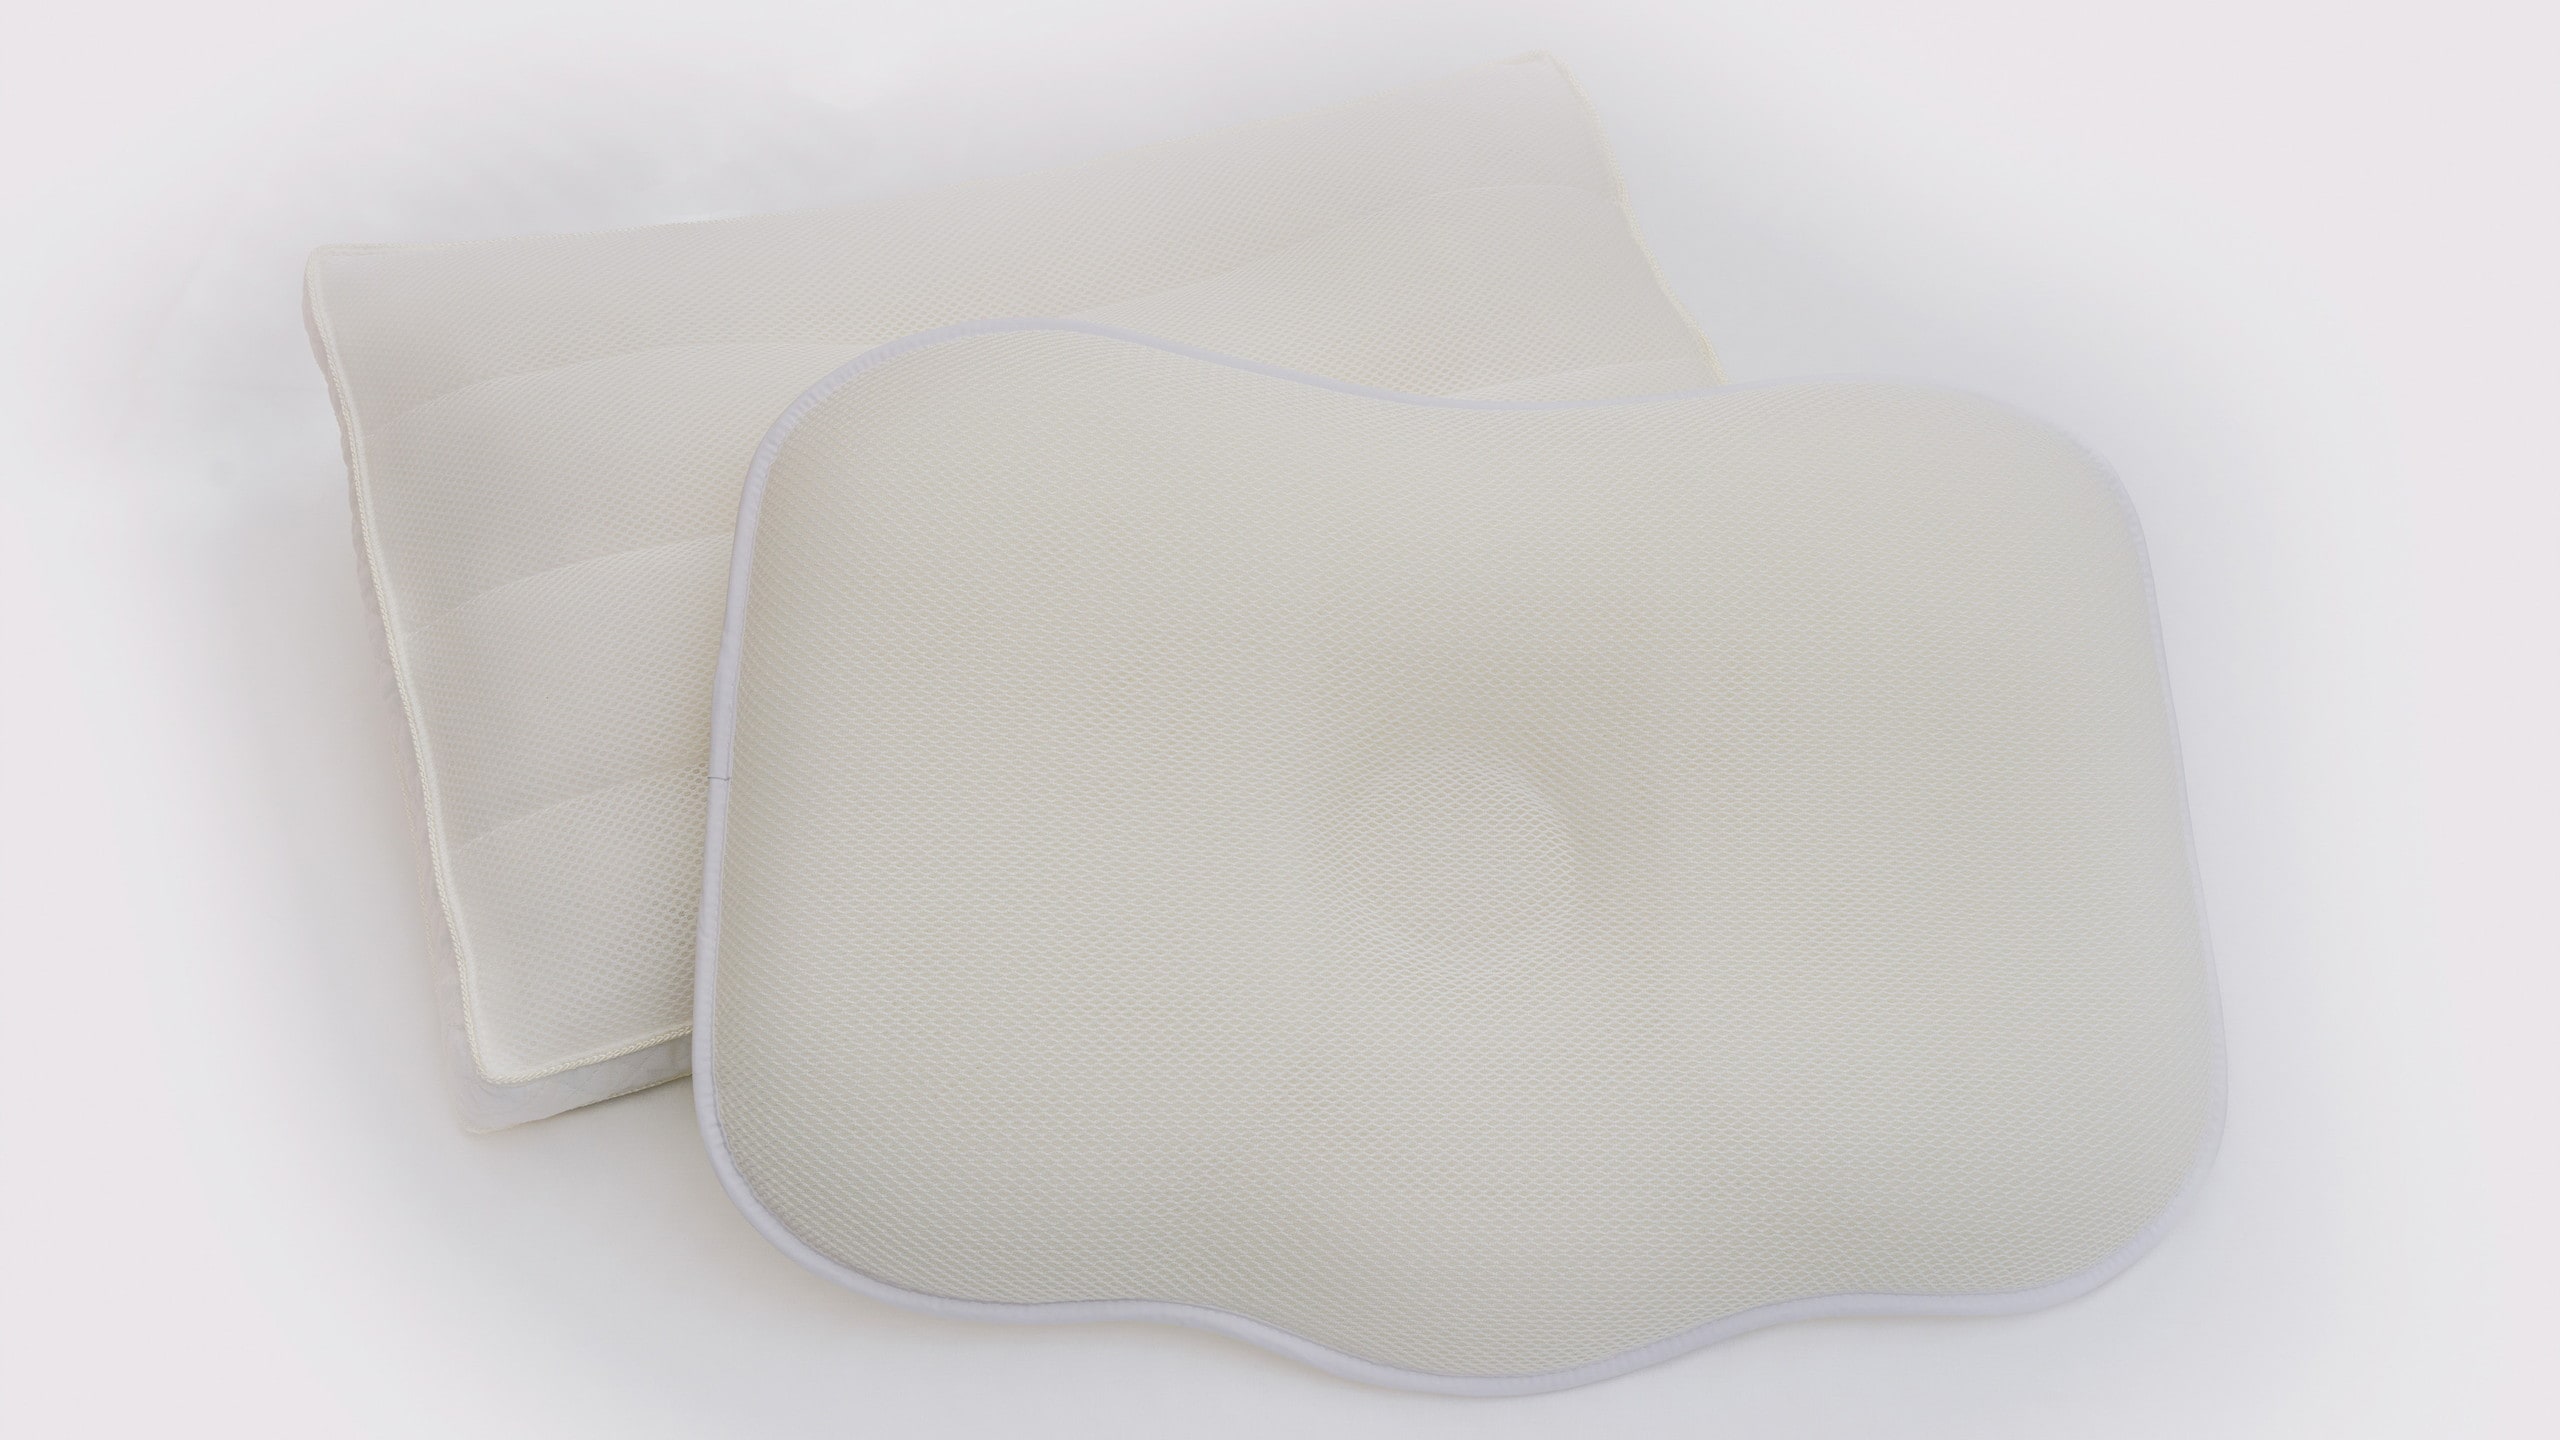  Two types of original pillows with different specifications